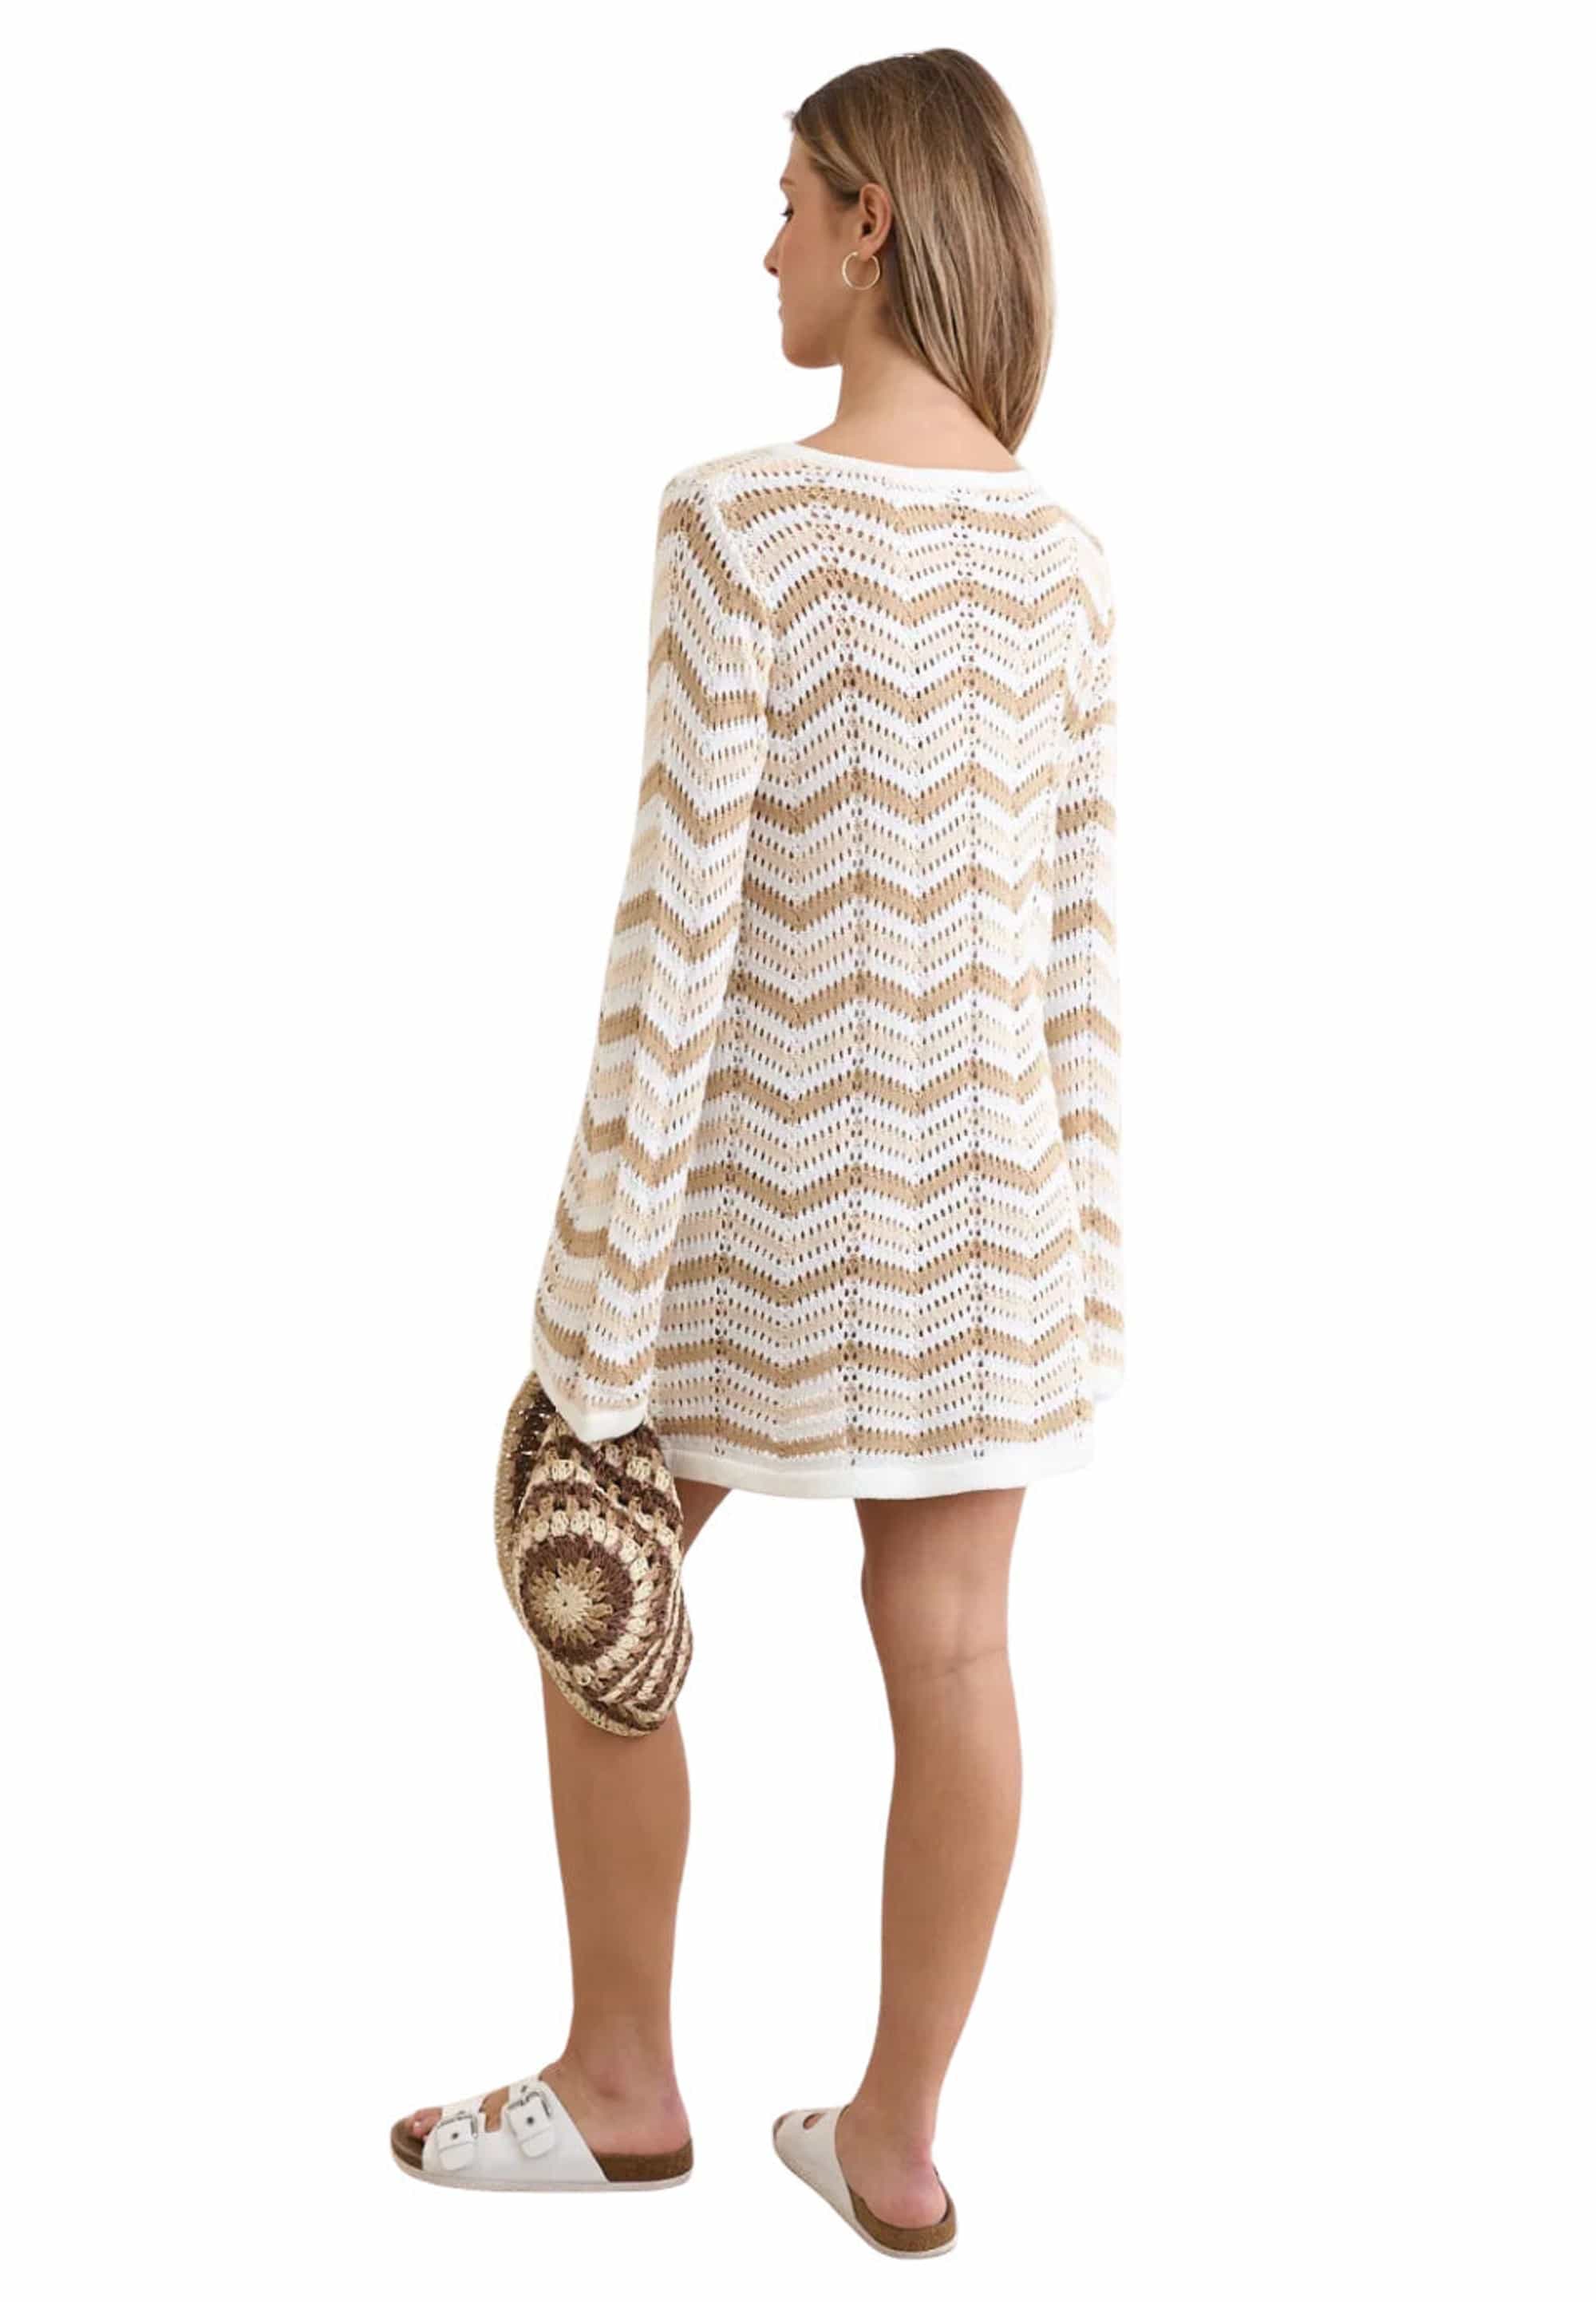 Clever Alice Knit Chevron Dress - clever alice